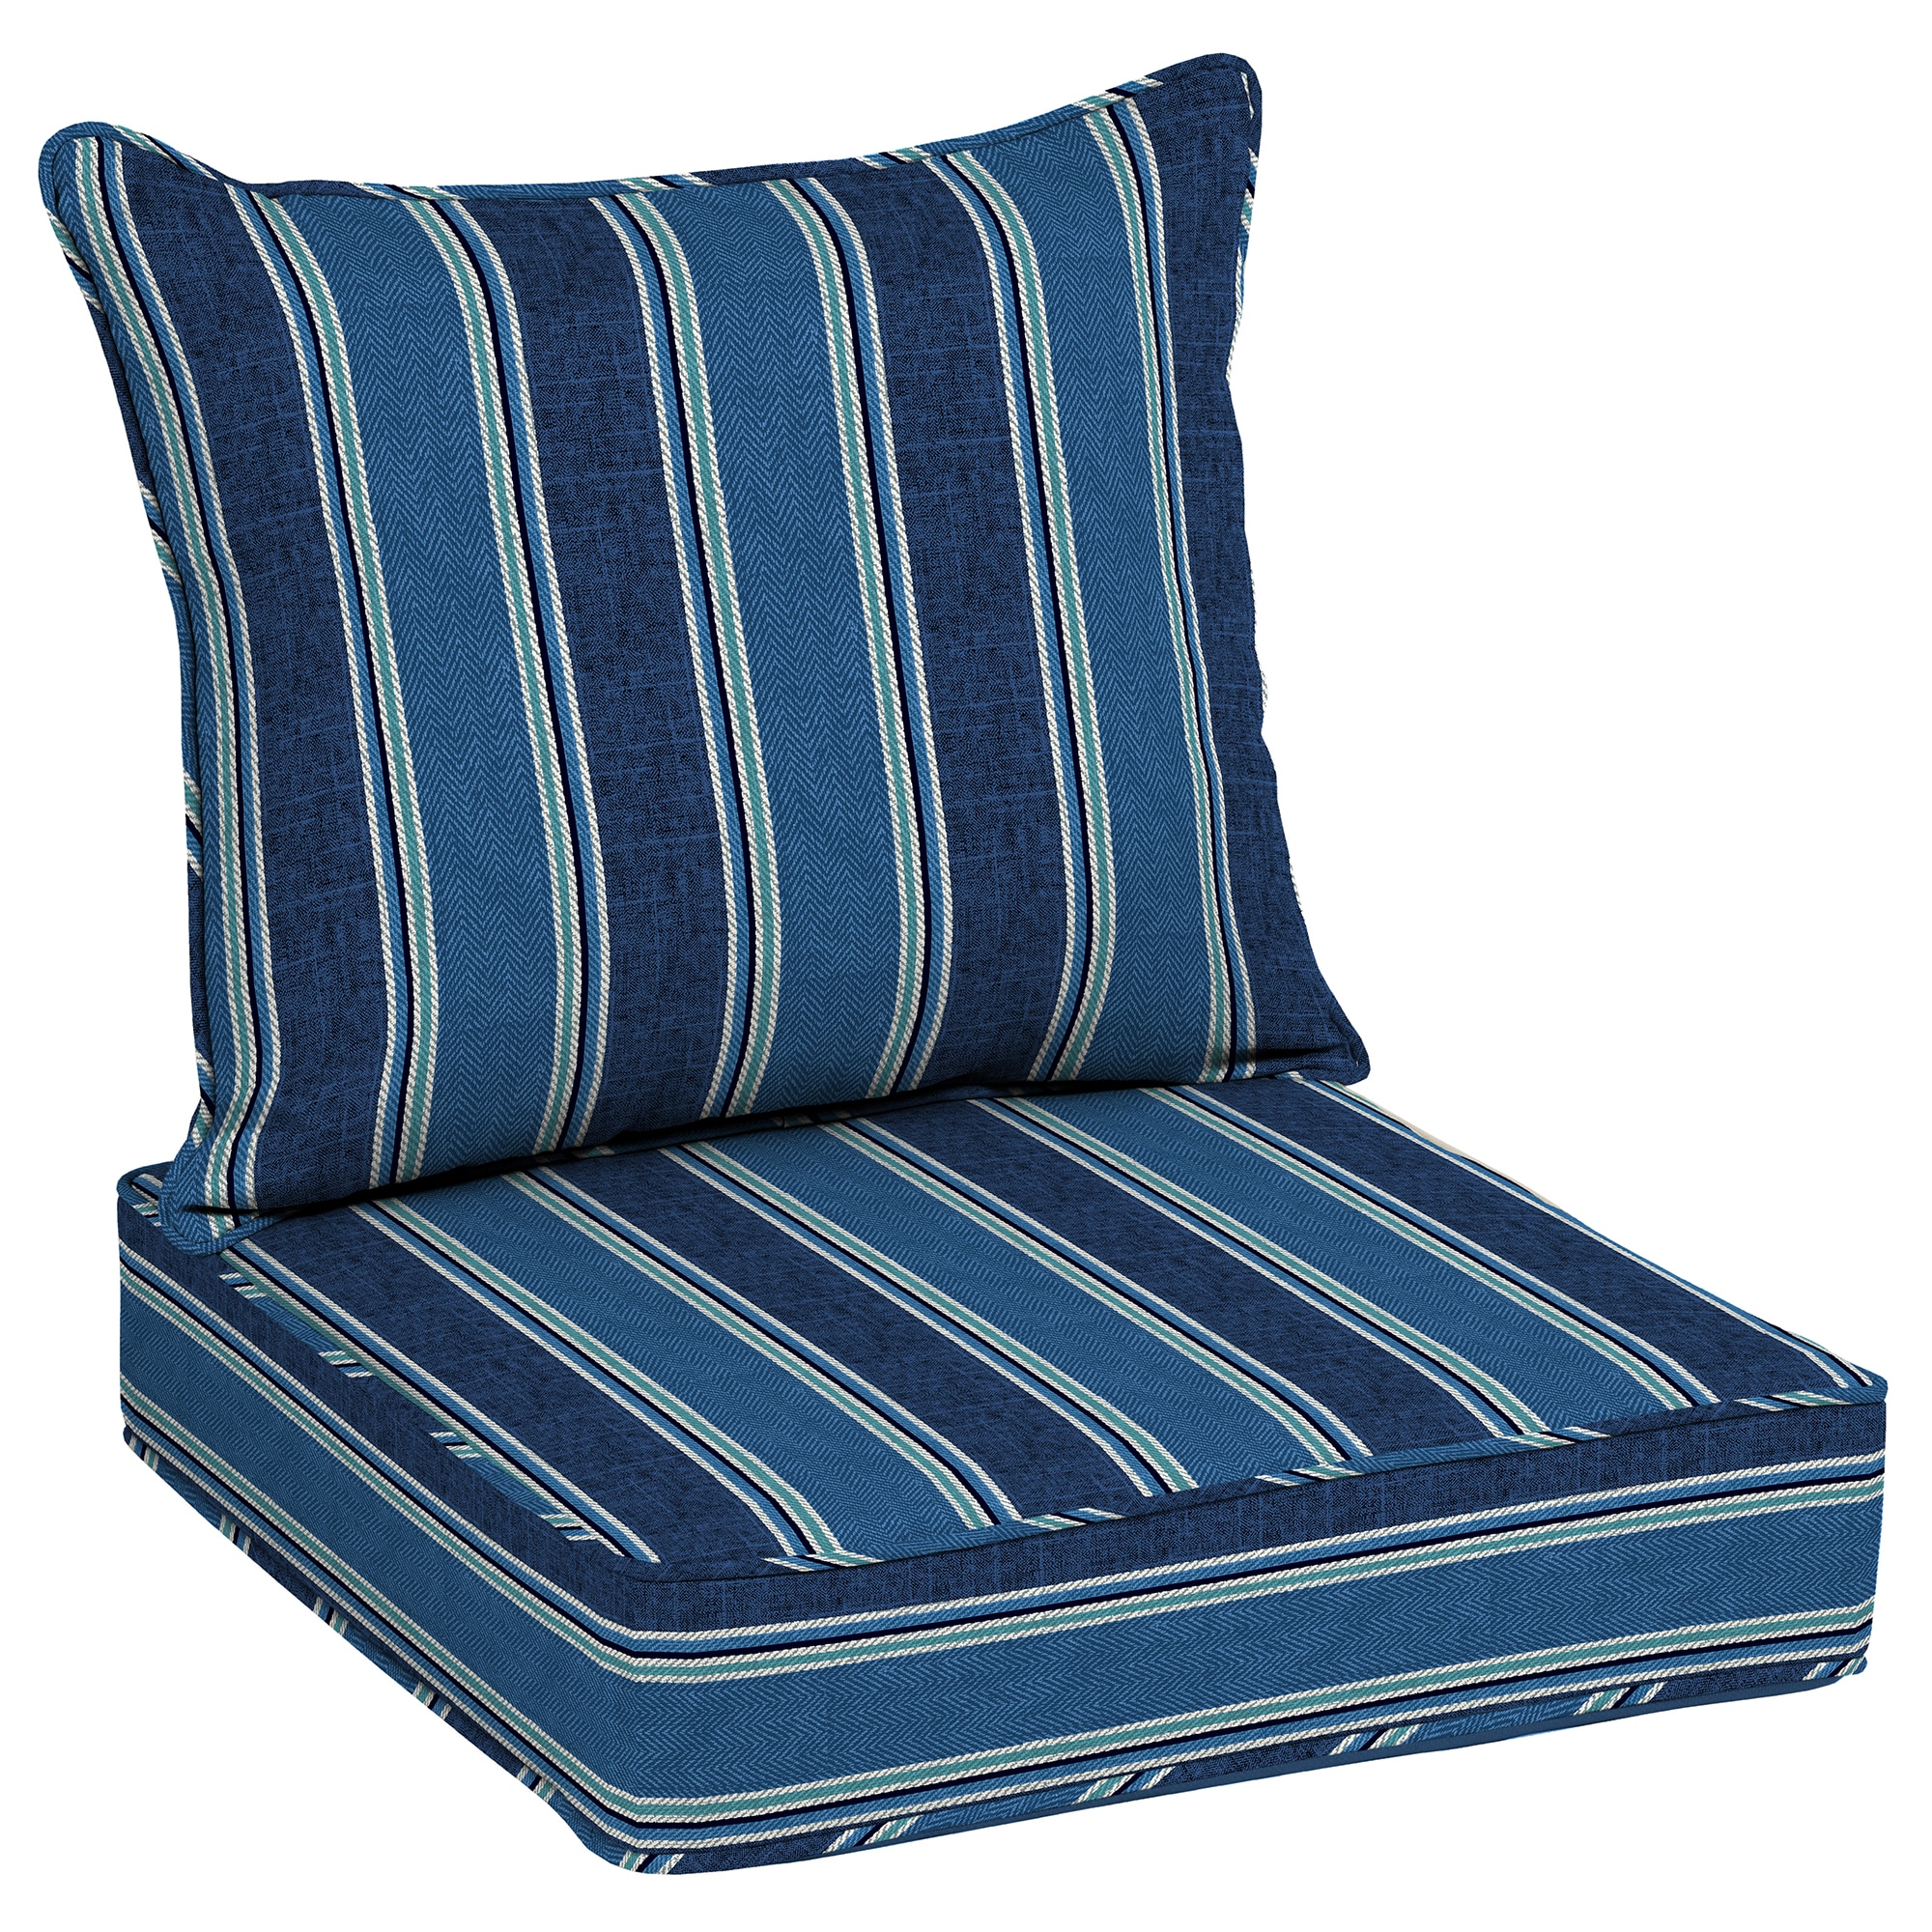 Allen Roth Woven Blue Stripe Deep Seat Set In The Patio Furniture Cushions Department At Com - Allen And Roth Patio Pillows